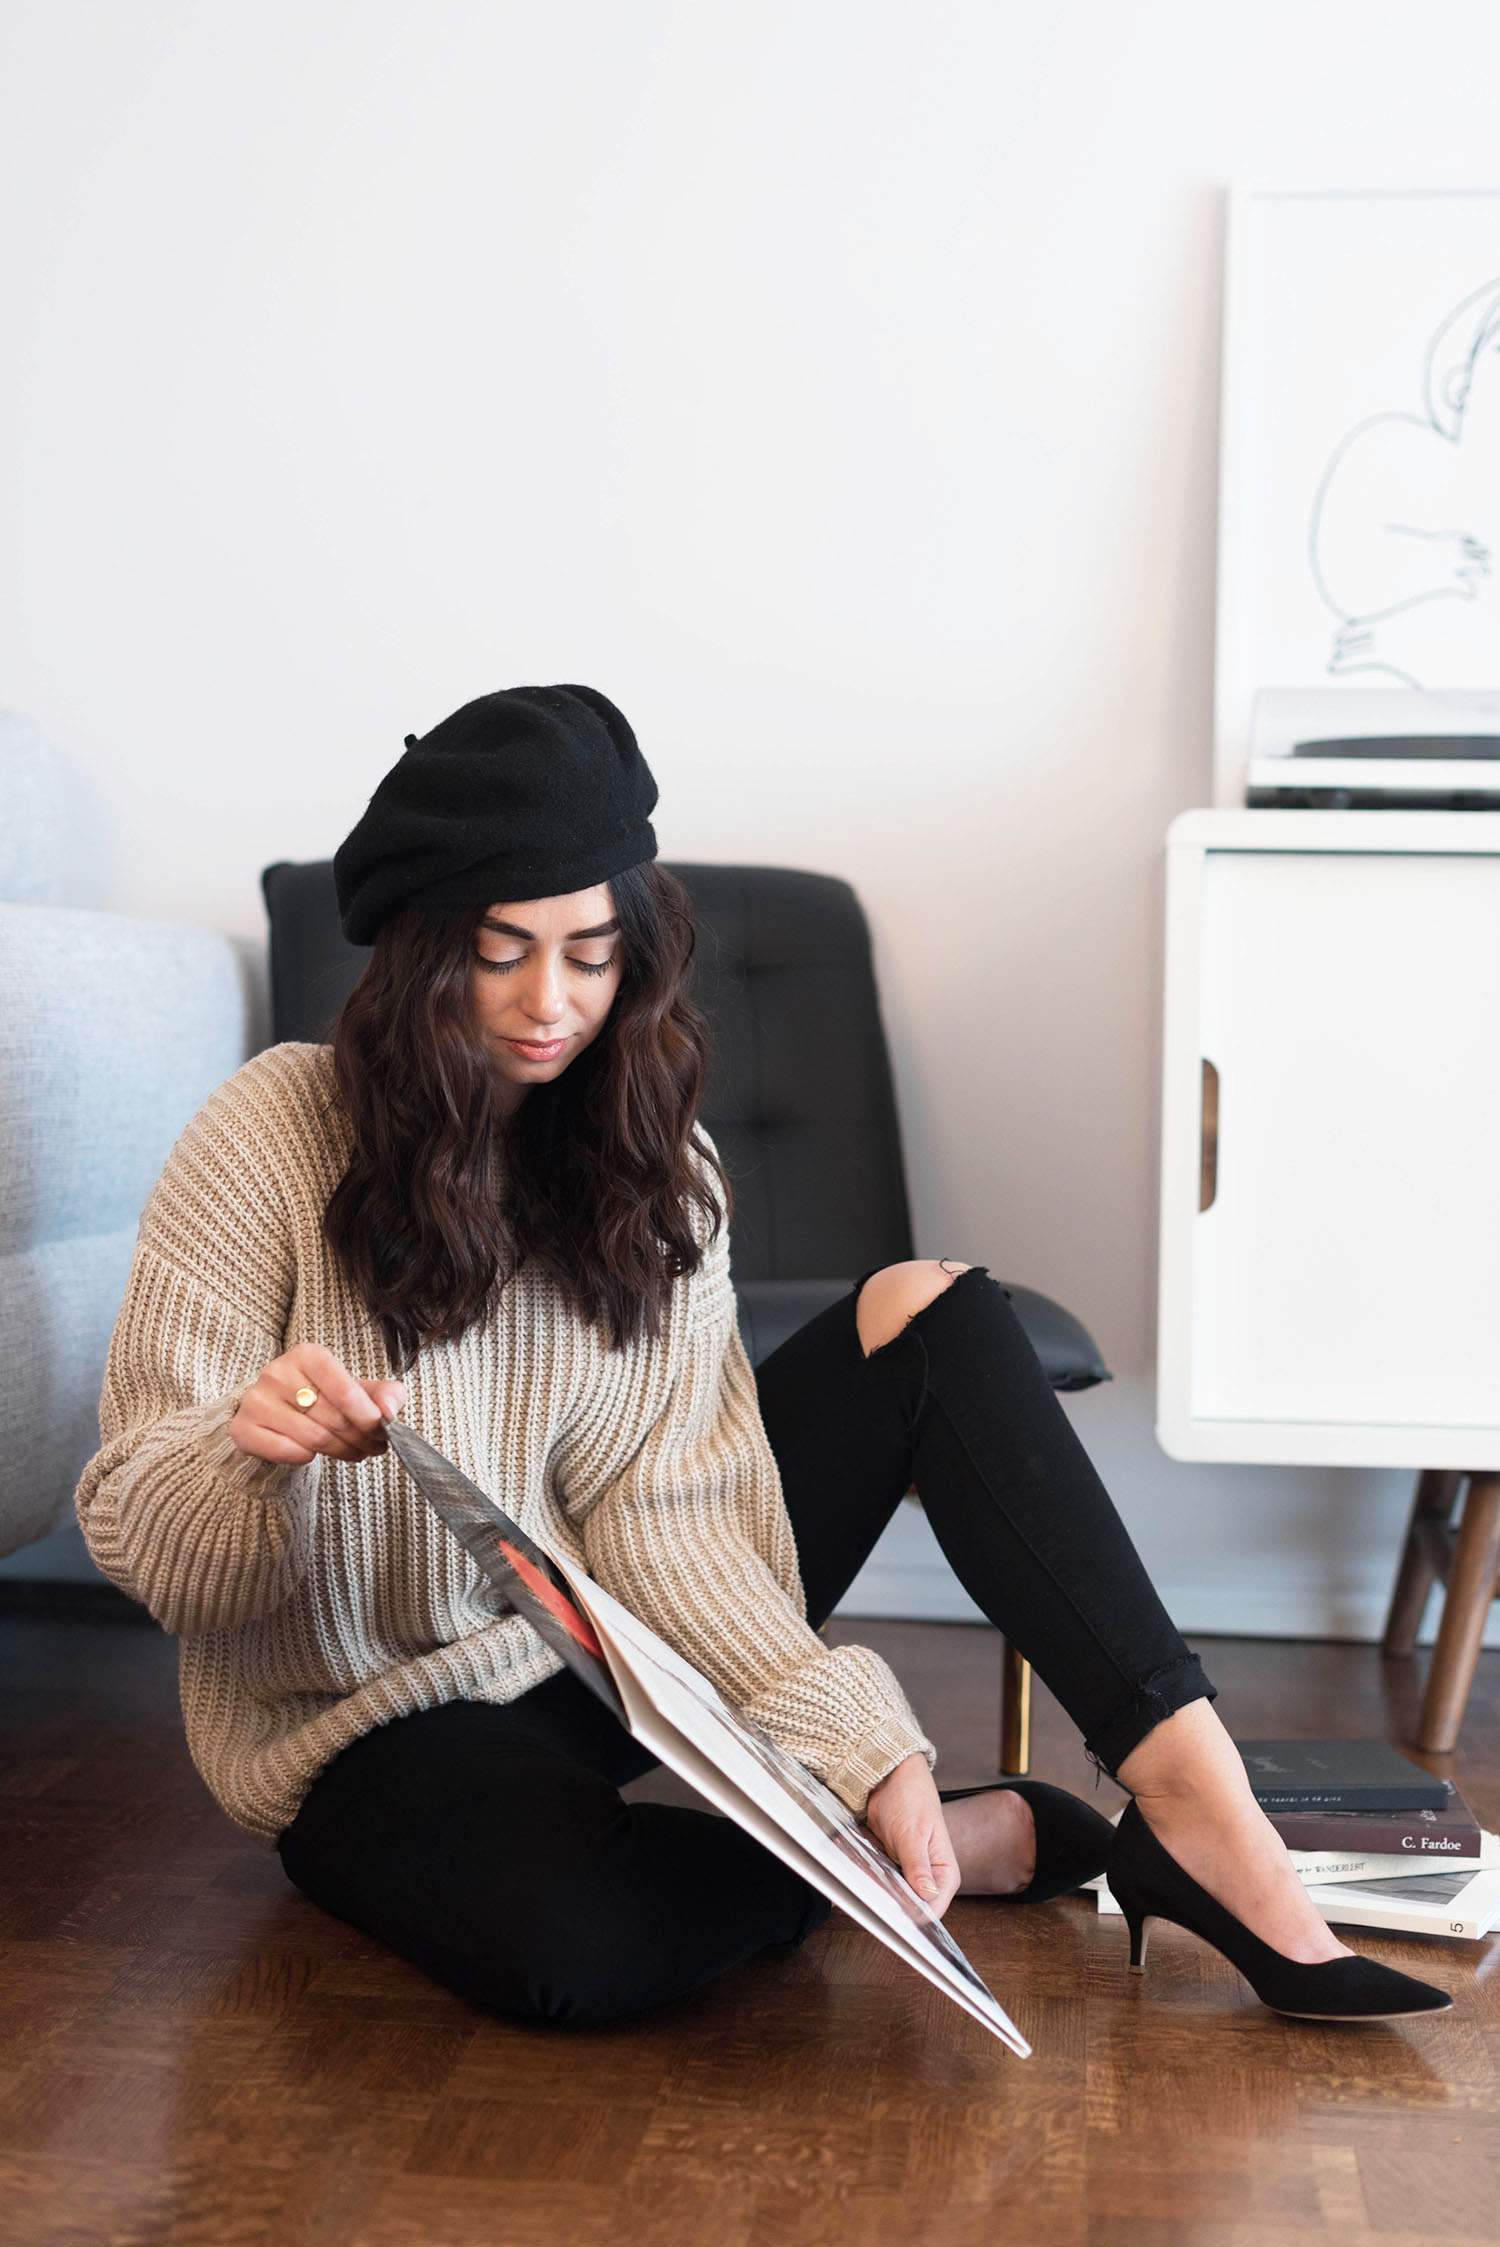 Winnipeg fashion blogger Cee Fardoe of Coco & Vera takes Bruce Springsteen record out of its sleeve, wearing an Anthropologie Bonnie beret and Paige jeans